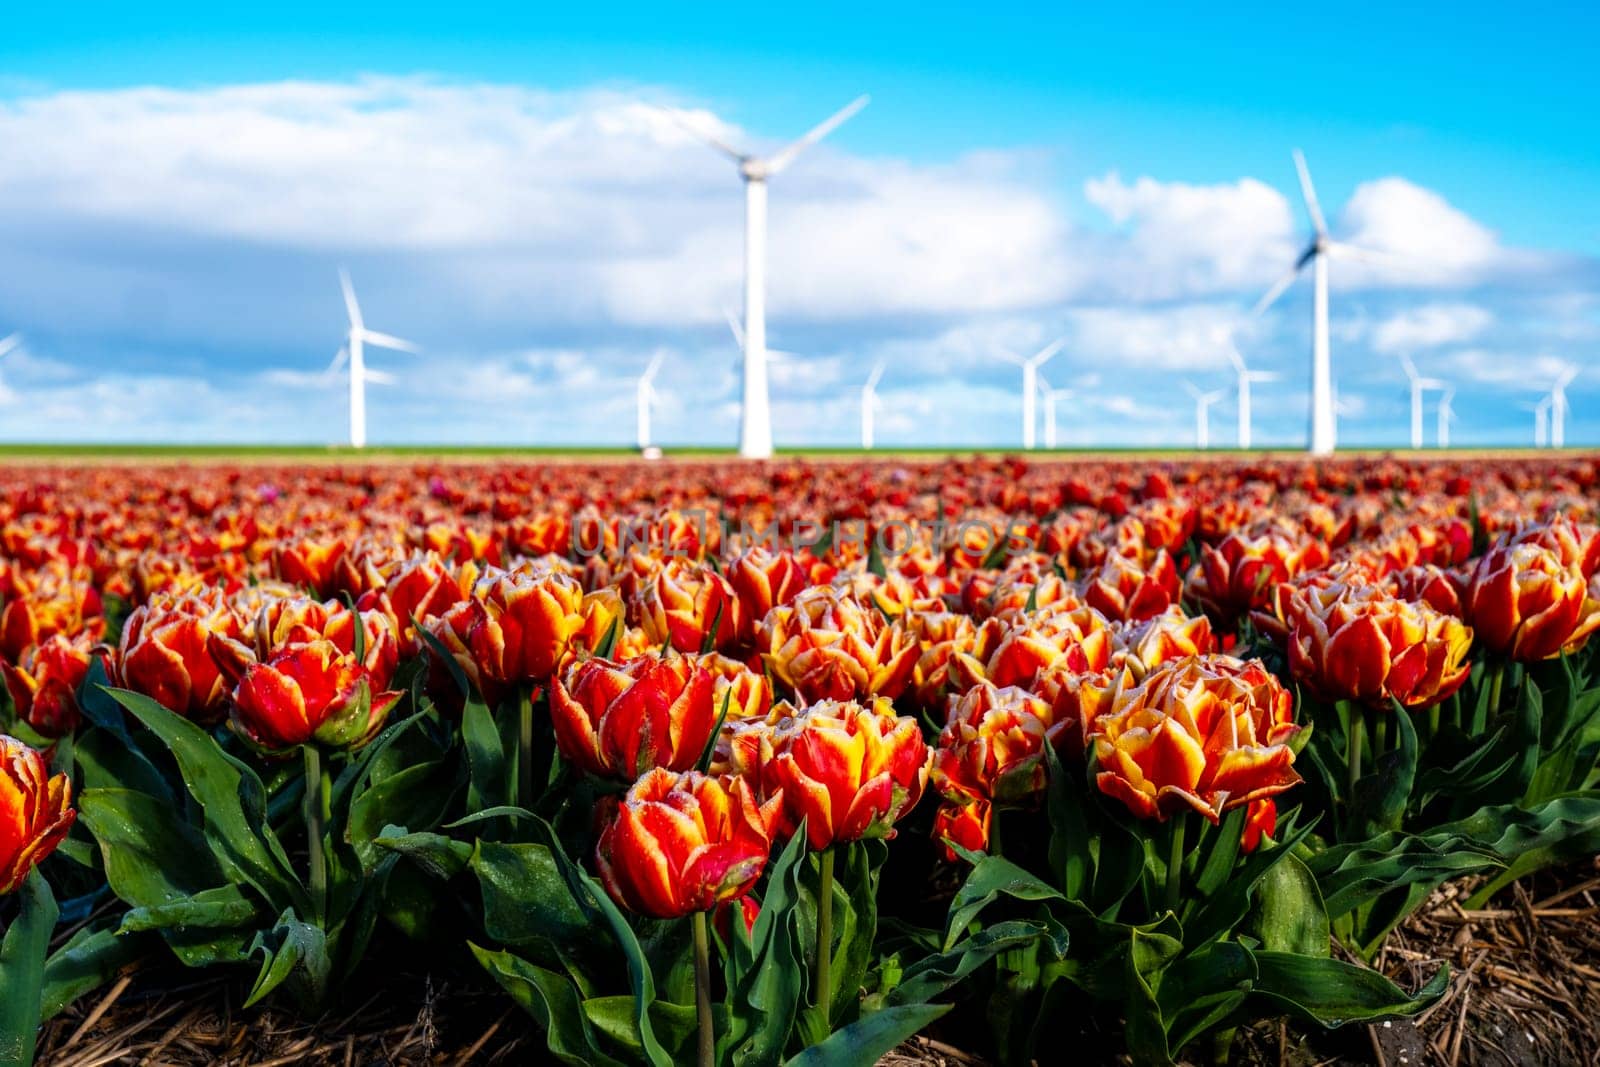 A vibrant field of red and yellow tulips sways gracefully in the spring breeze, with traditional windmills standing tall in the background. windmill turbines in the Noordoostpolder Netherlands